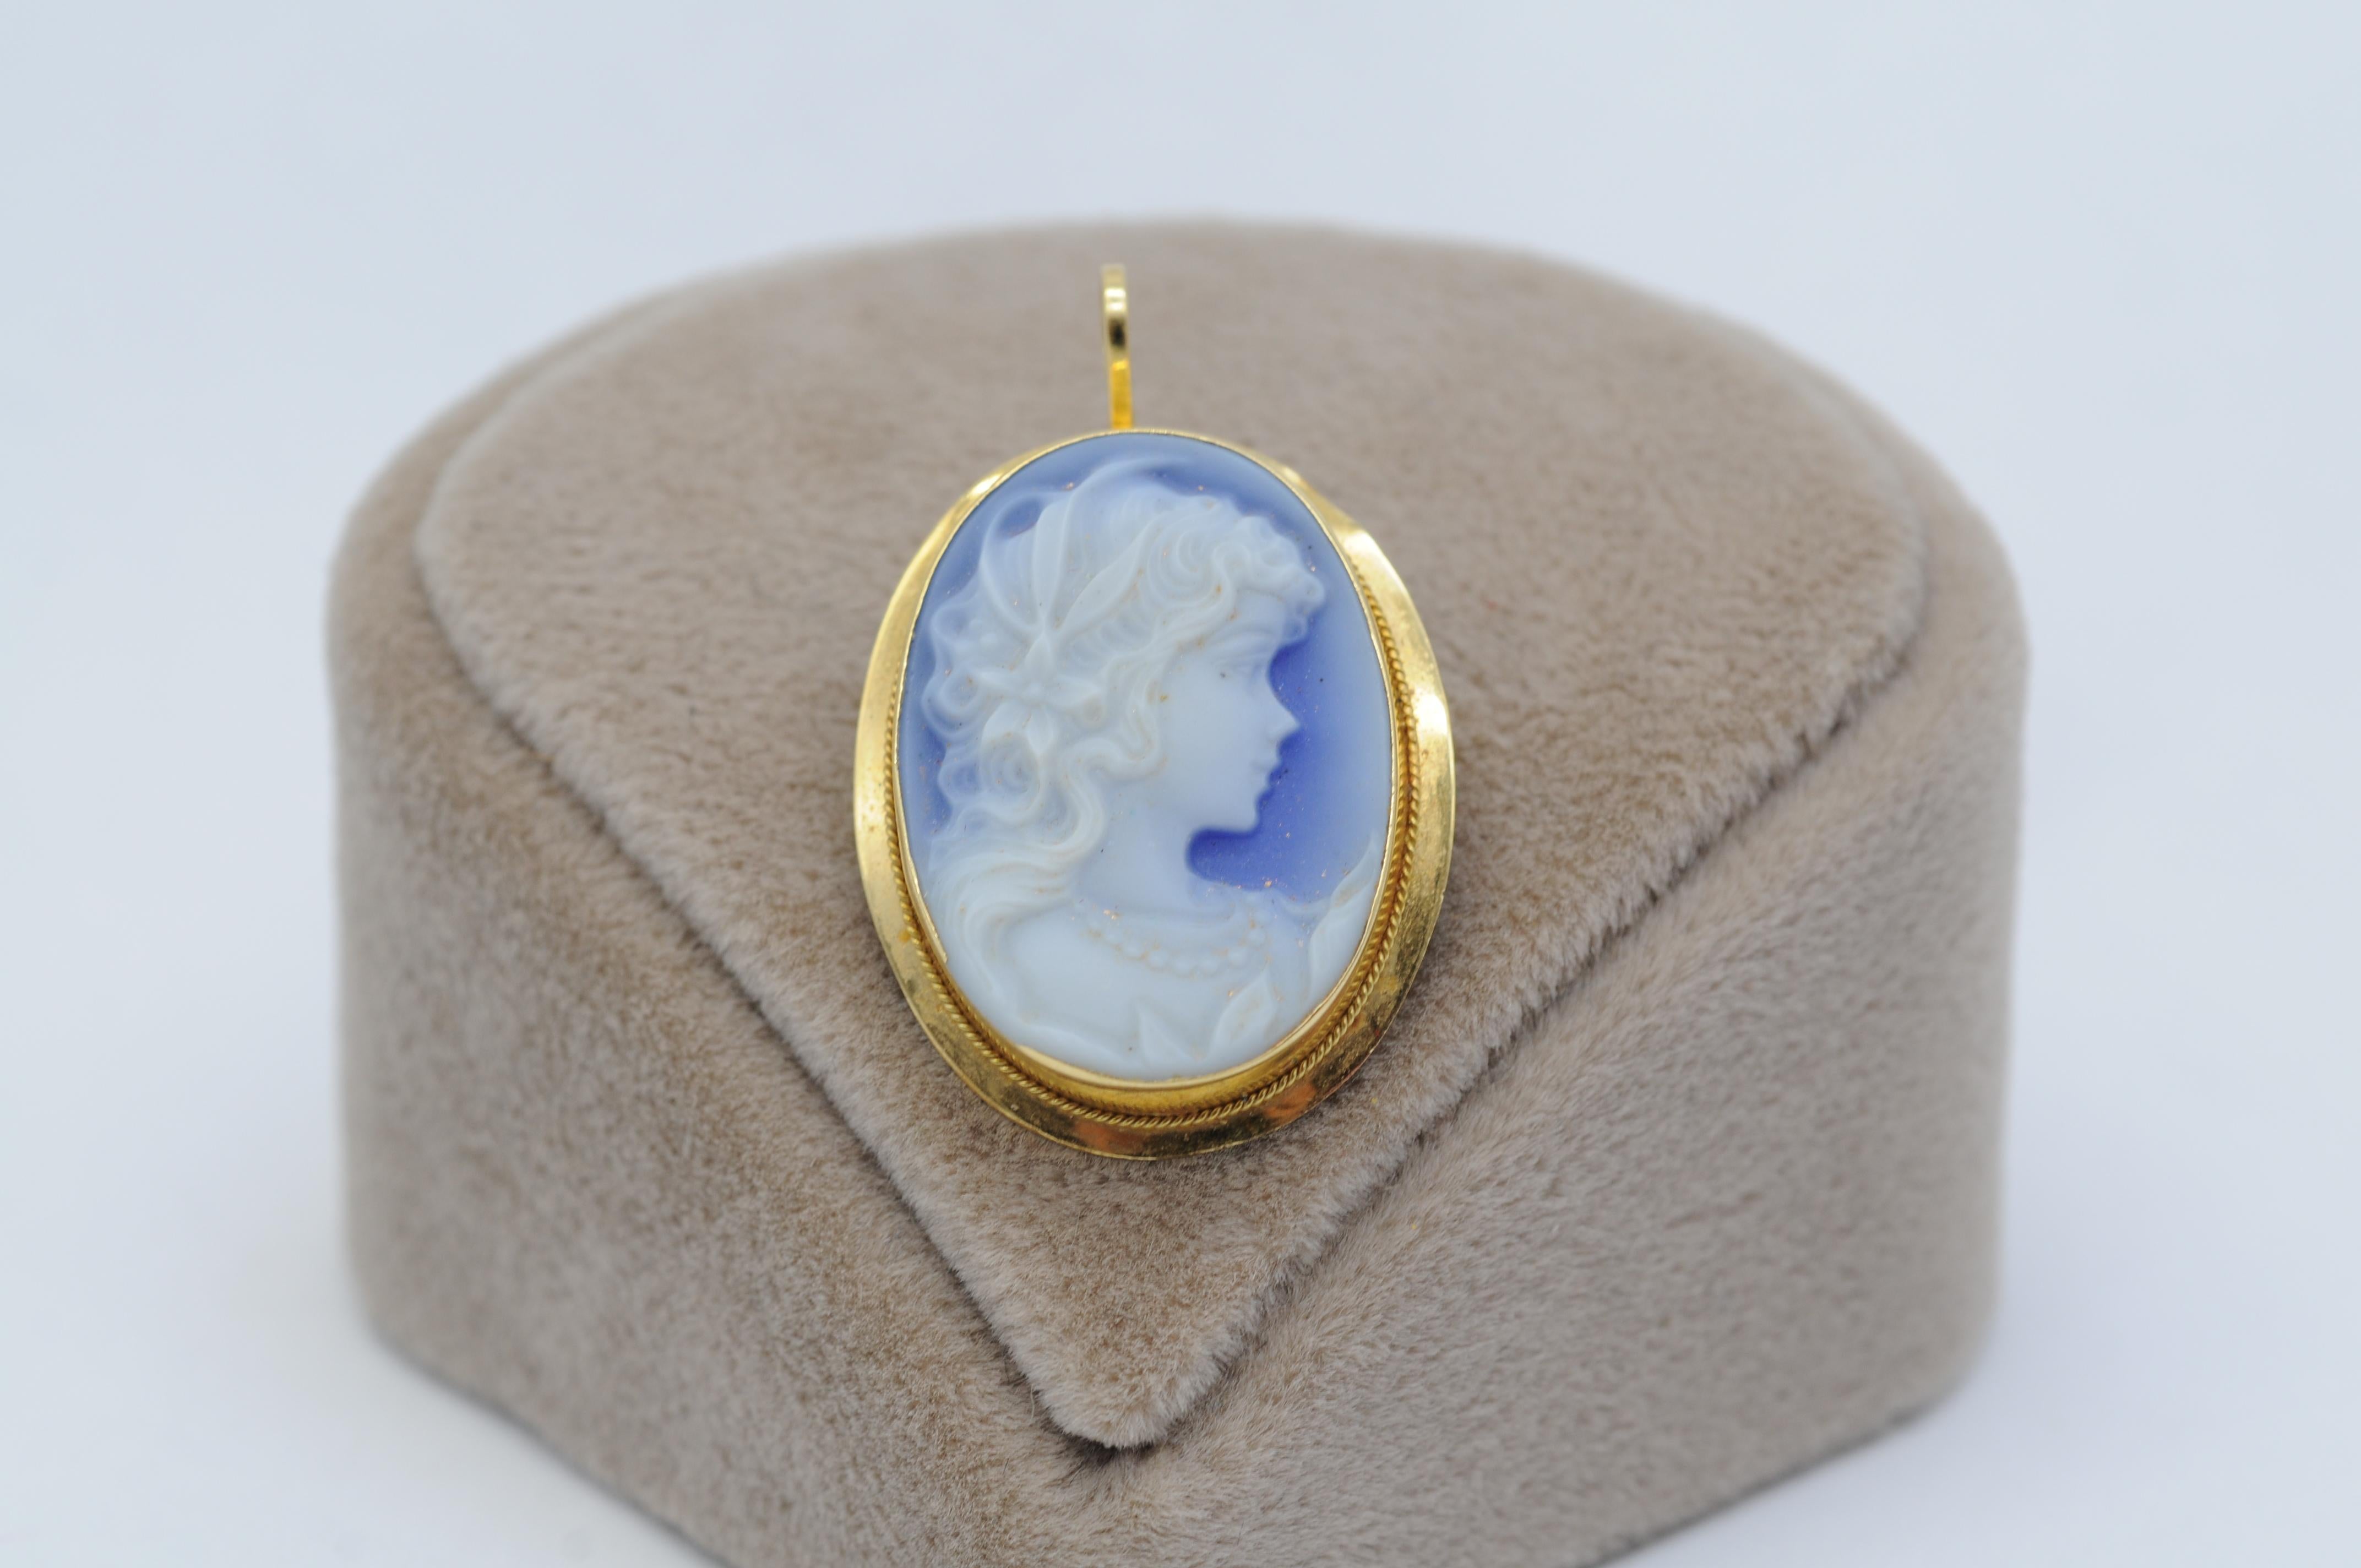 Behold the enchanting beauty of this exquisite blue 18k yellow gold cameo. This magnificent piece of jewelry features a stunning depiction of a beautiful woman, captured in intricate detail.

What sets this cameo apart is its versatility, offering